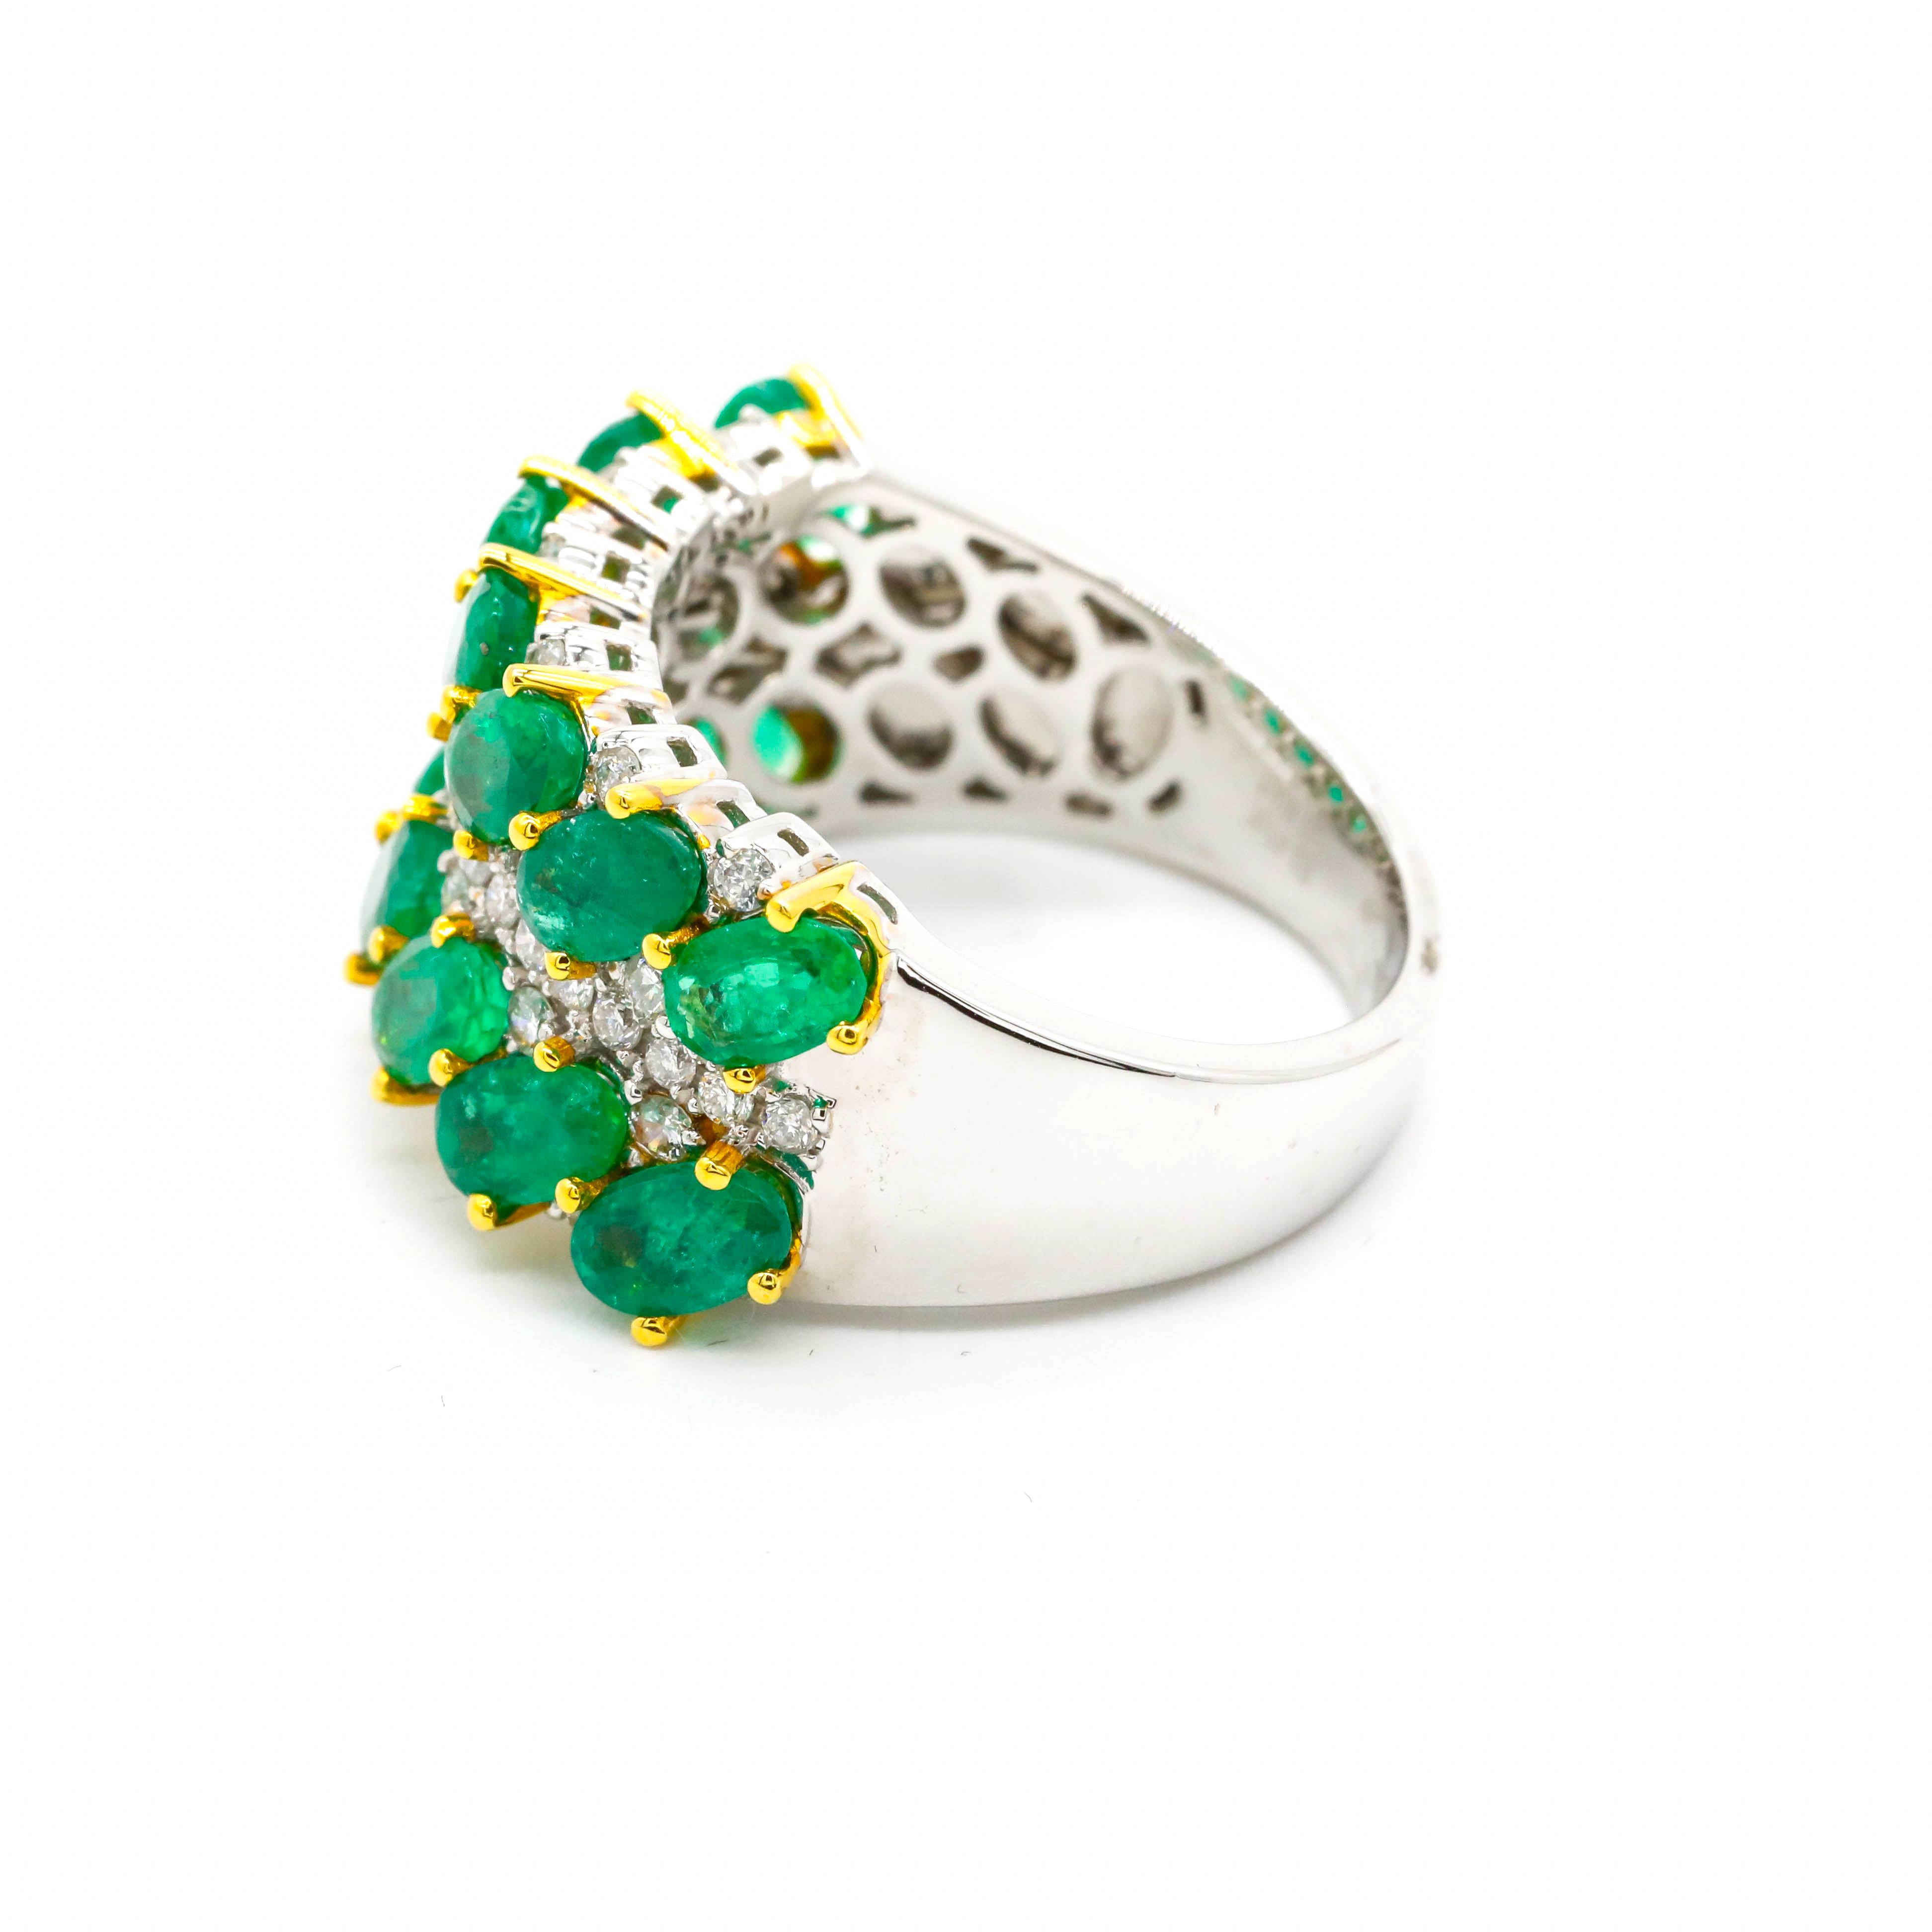 3.20 Carat Oval Cut Emerald and Round Diamond Band Ring in 18k Two-Tone Gold

Glamorous look. The set of oval-shaped emeralds are set in three-stone horizontal rows in a prong setting. Diamonds are layered around the emeralds, creating a wide unique